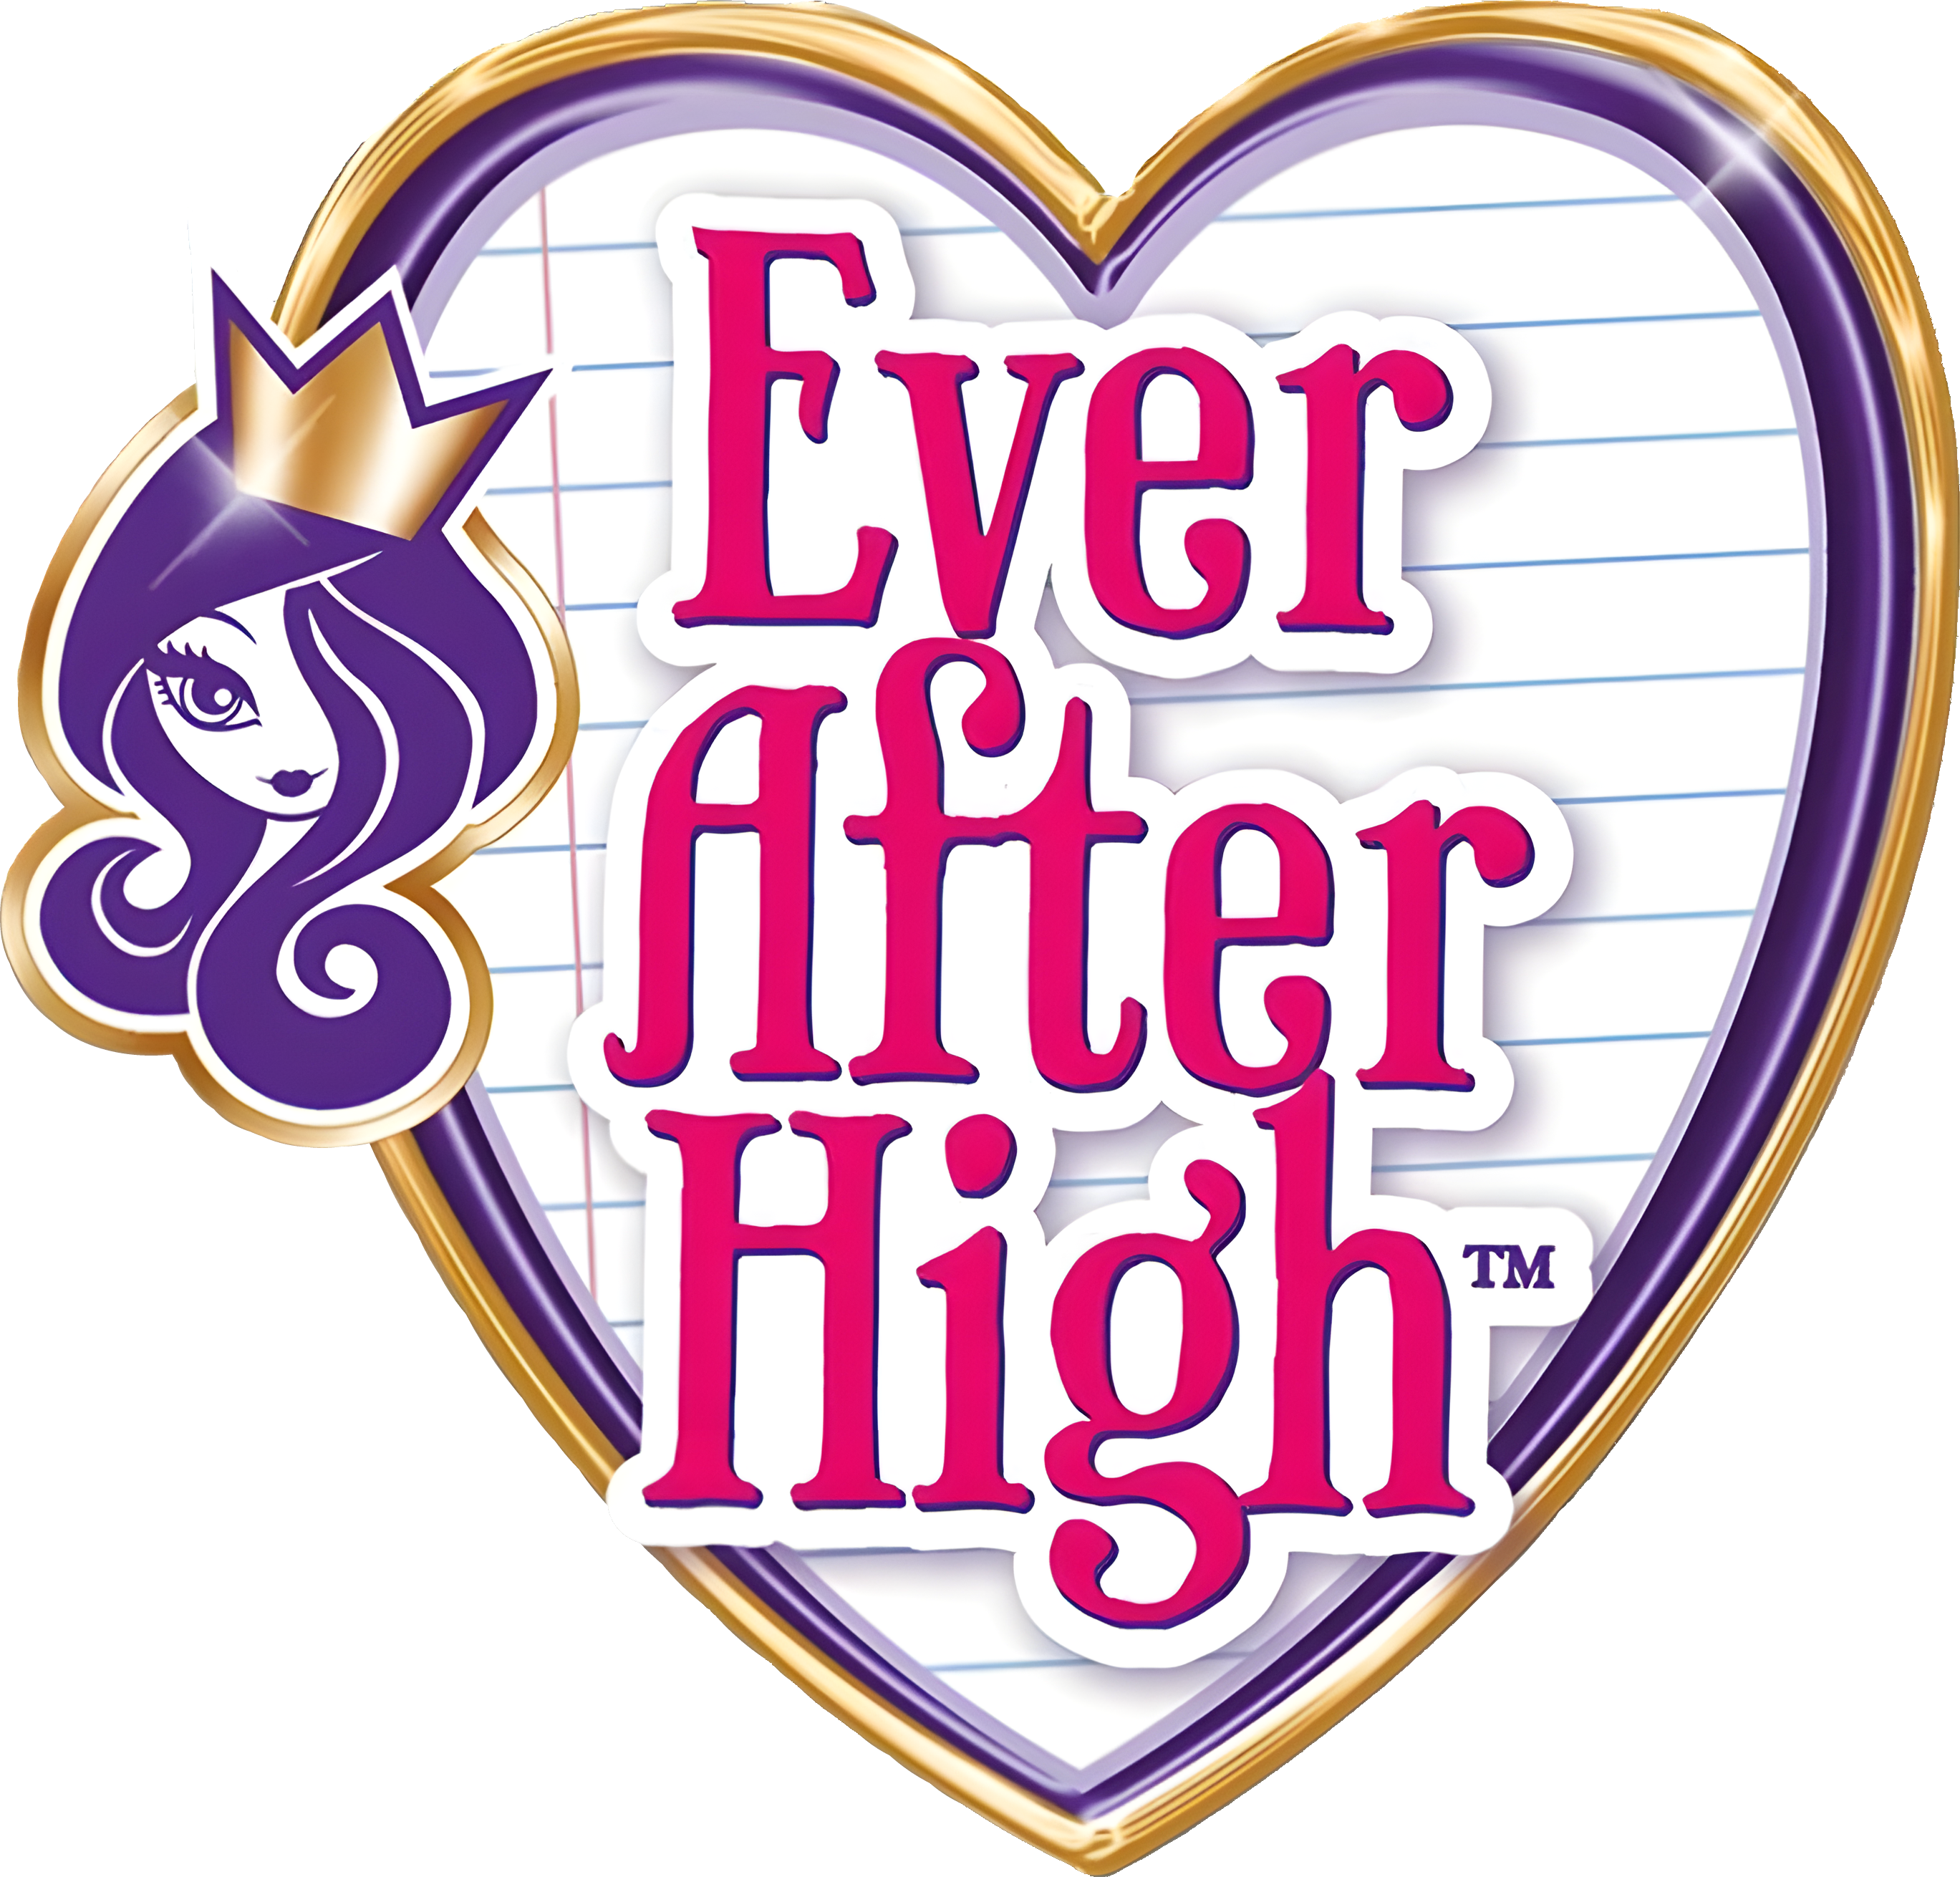 9 Ever after high ideas  ever after high, ever after, kawaii girl drawings